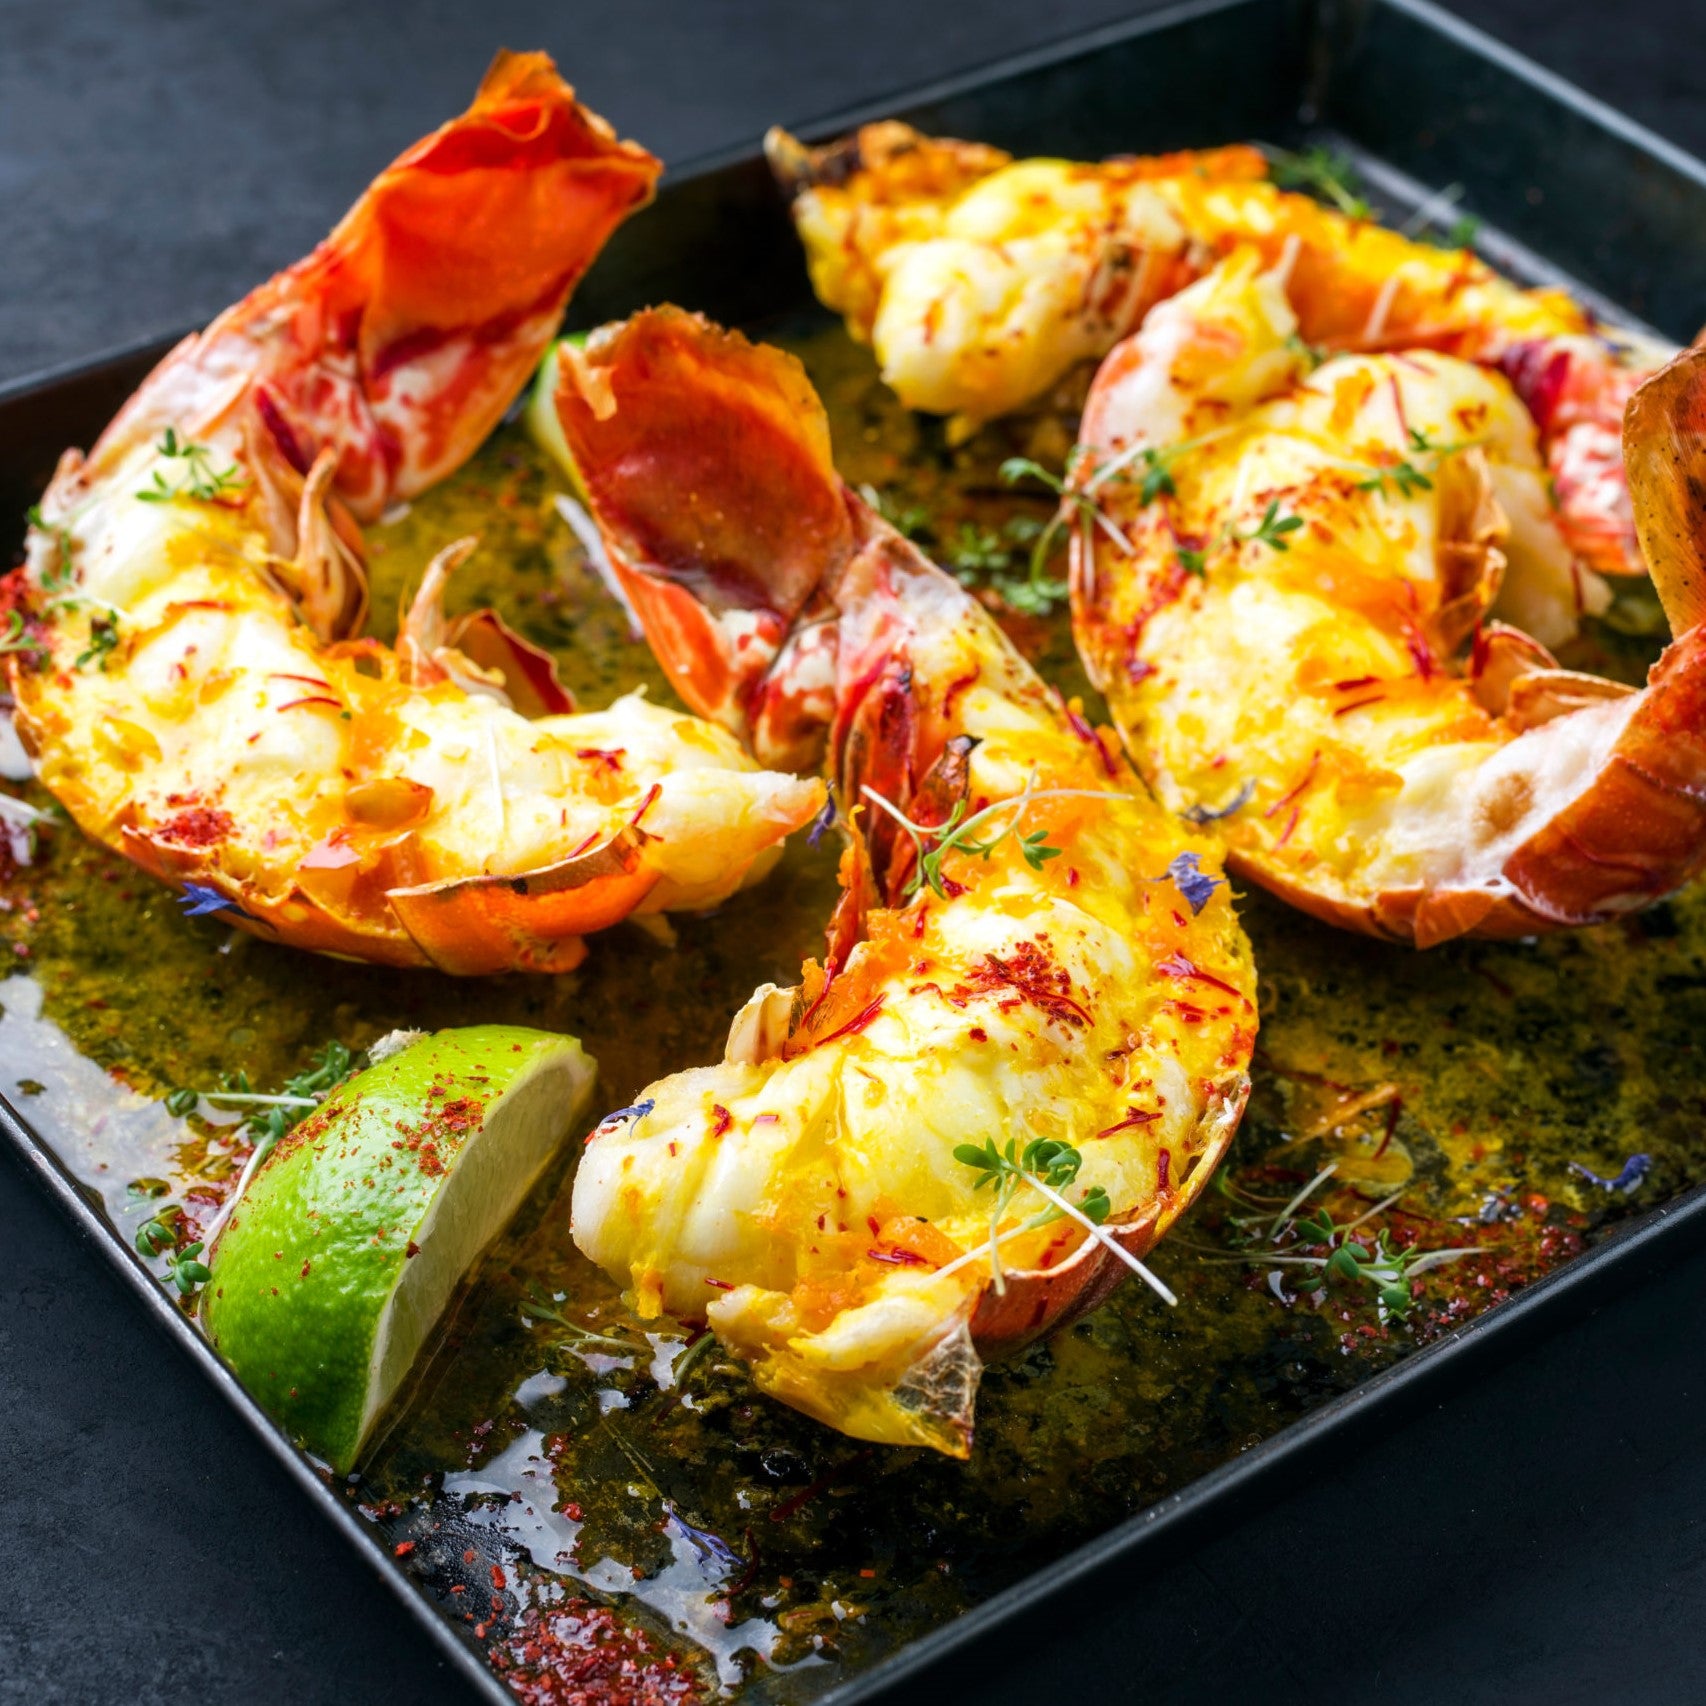 Baked Lobster Tail with Black Truffle and Cheese (6 pcs)